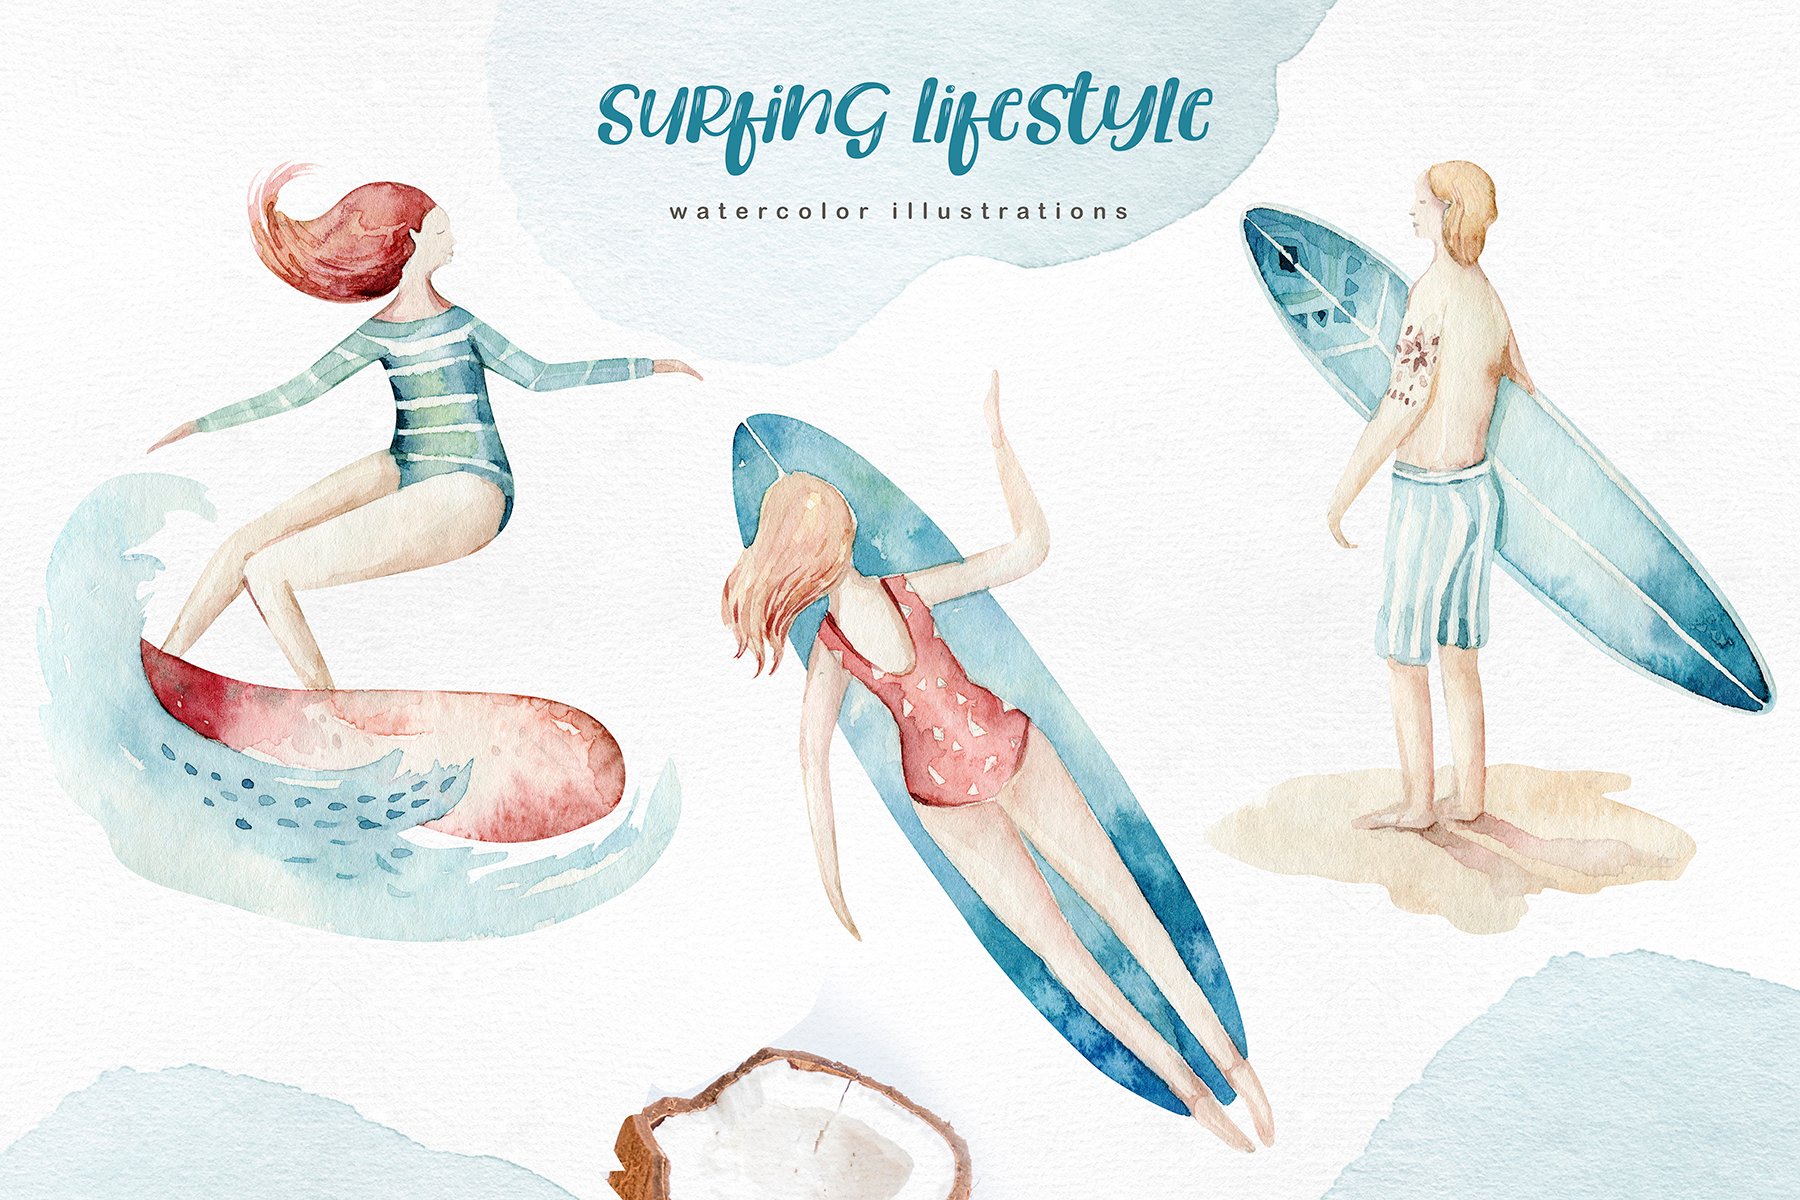 Surfing Lifestyle - Watercolor Ocean Collection